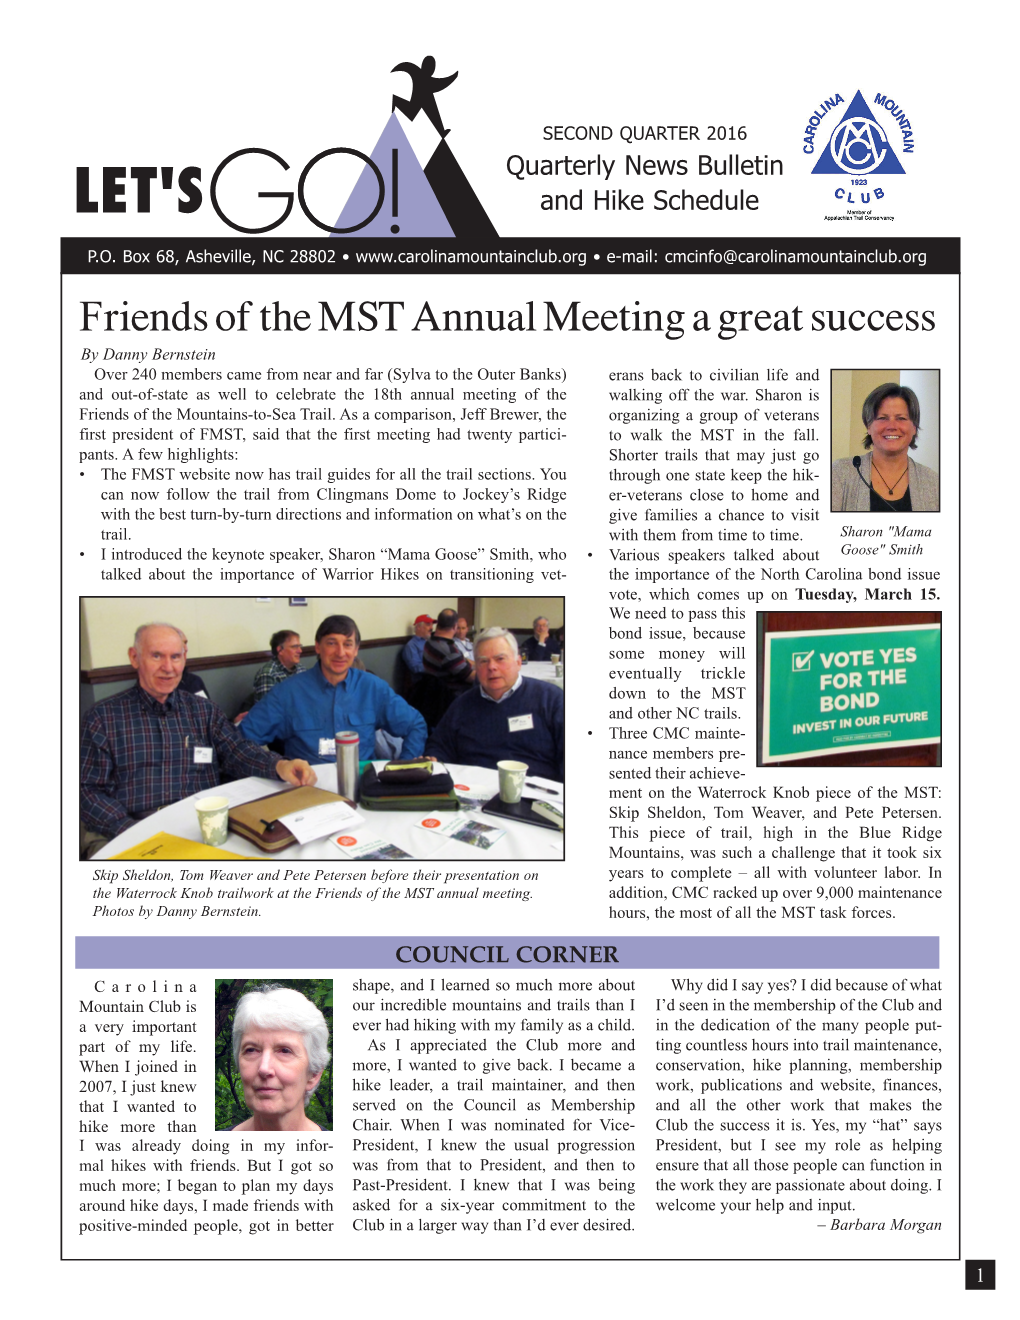 Friends of the MST Annual Meeting a Great Success